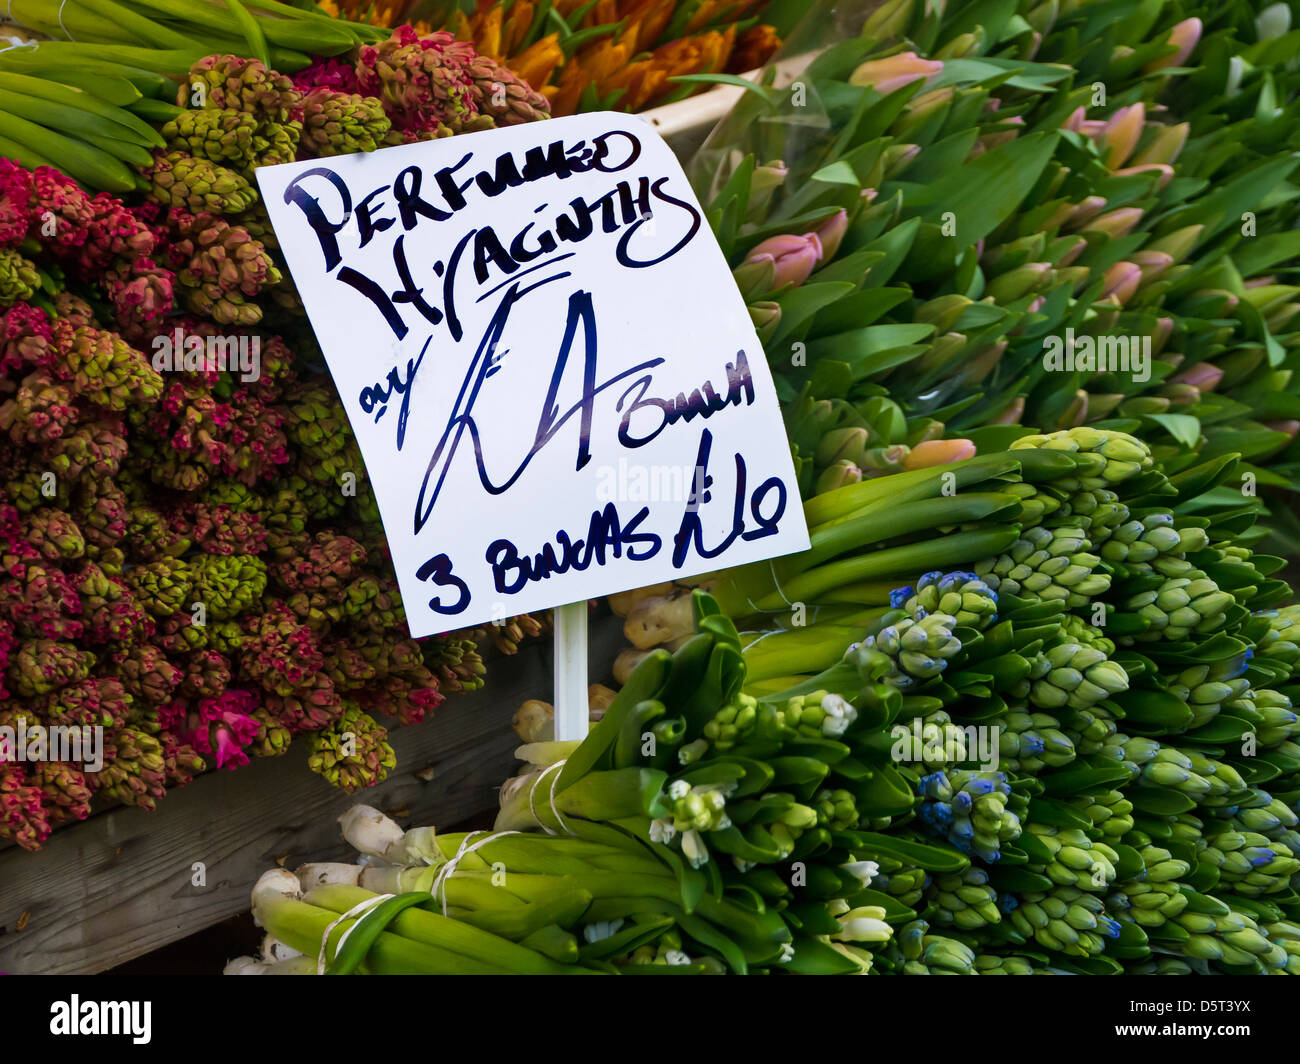 LONDON, UK - APRIL 07, 2013:  Price label on stall at Columbia Road Flower Market Stock Photo